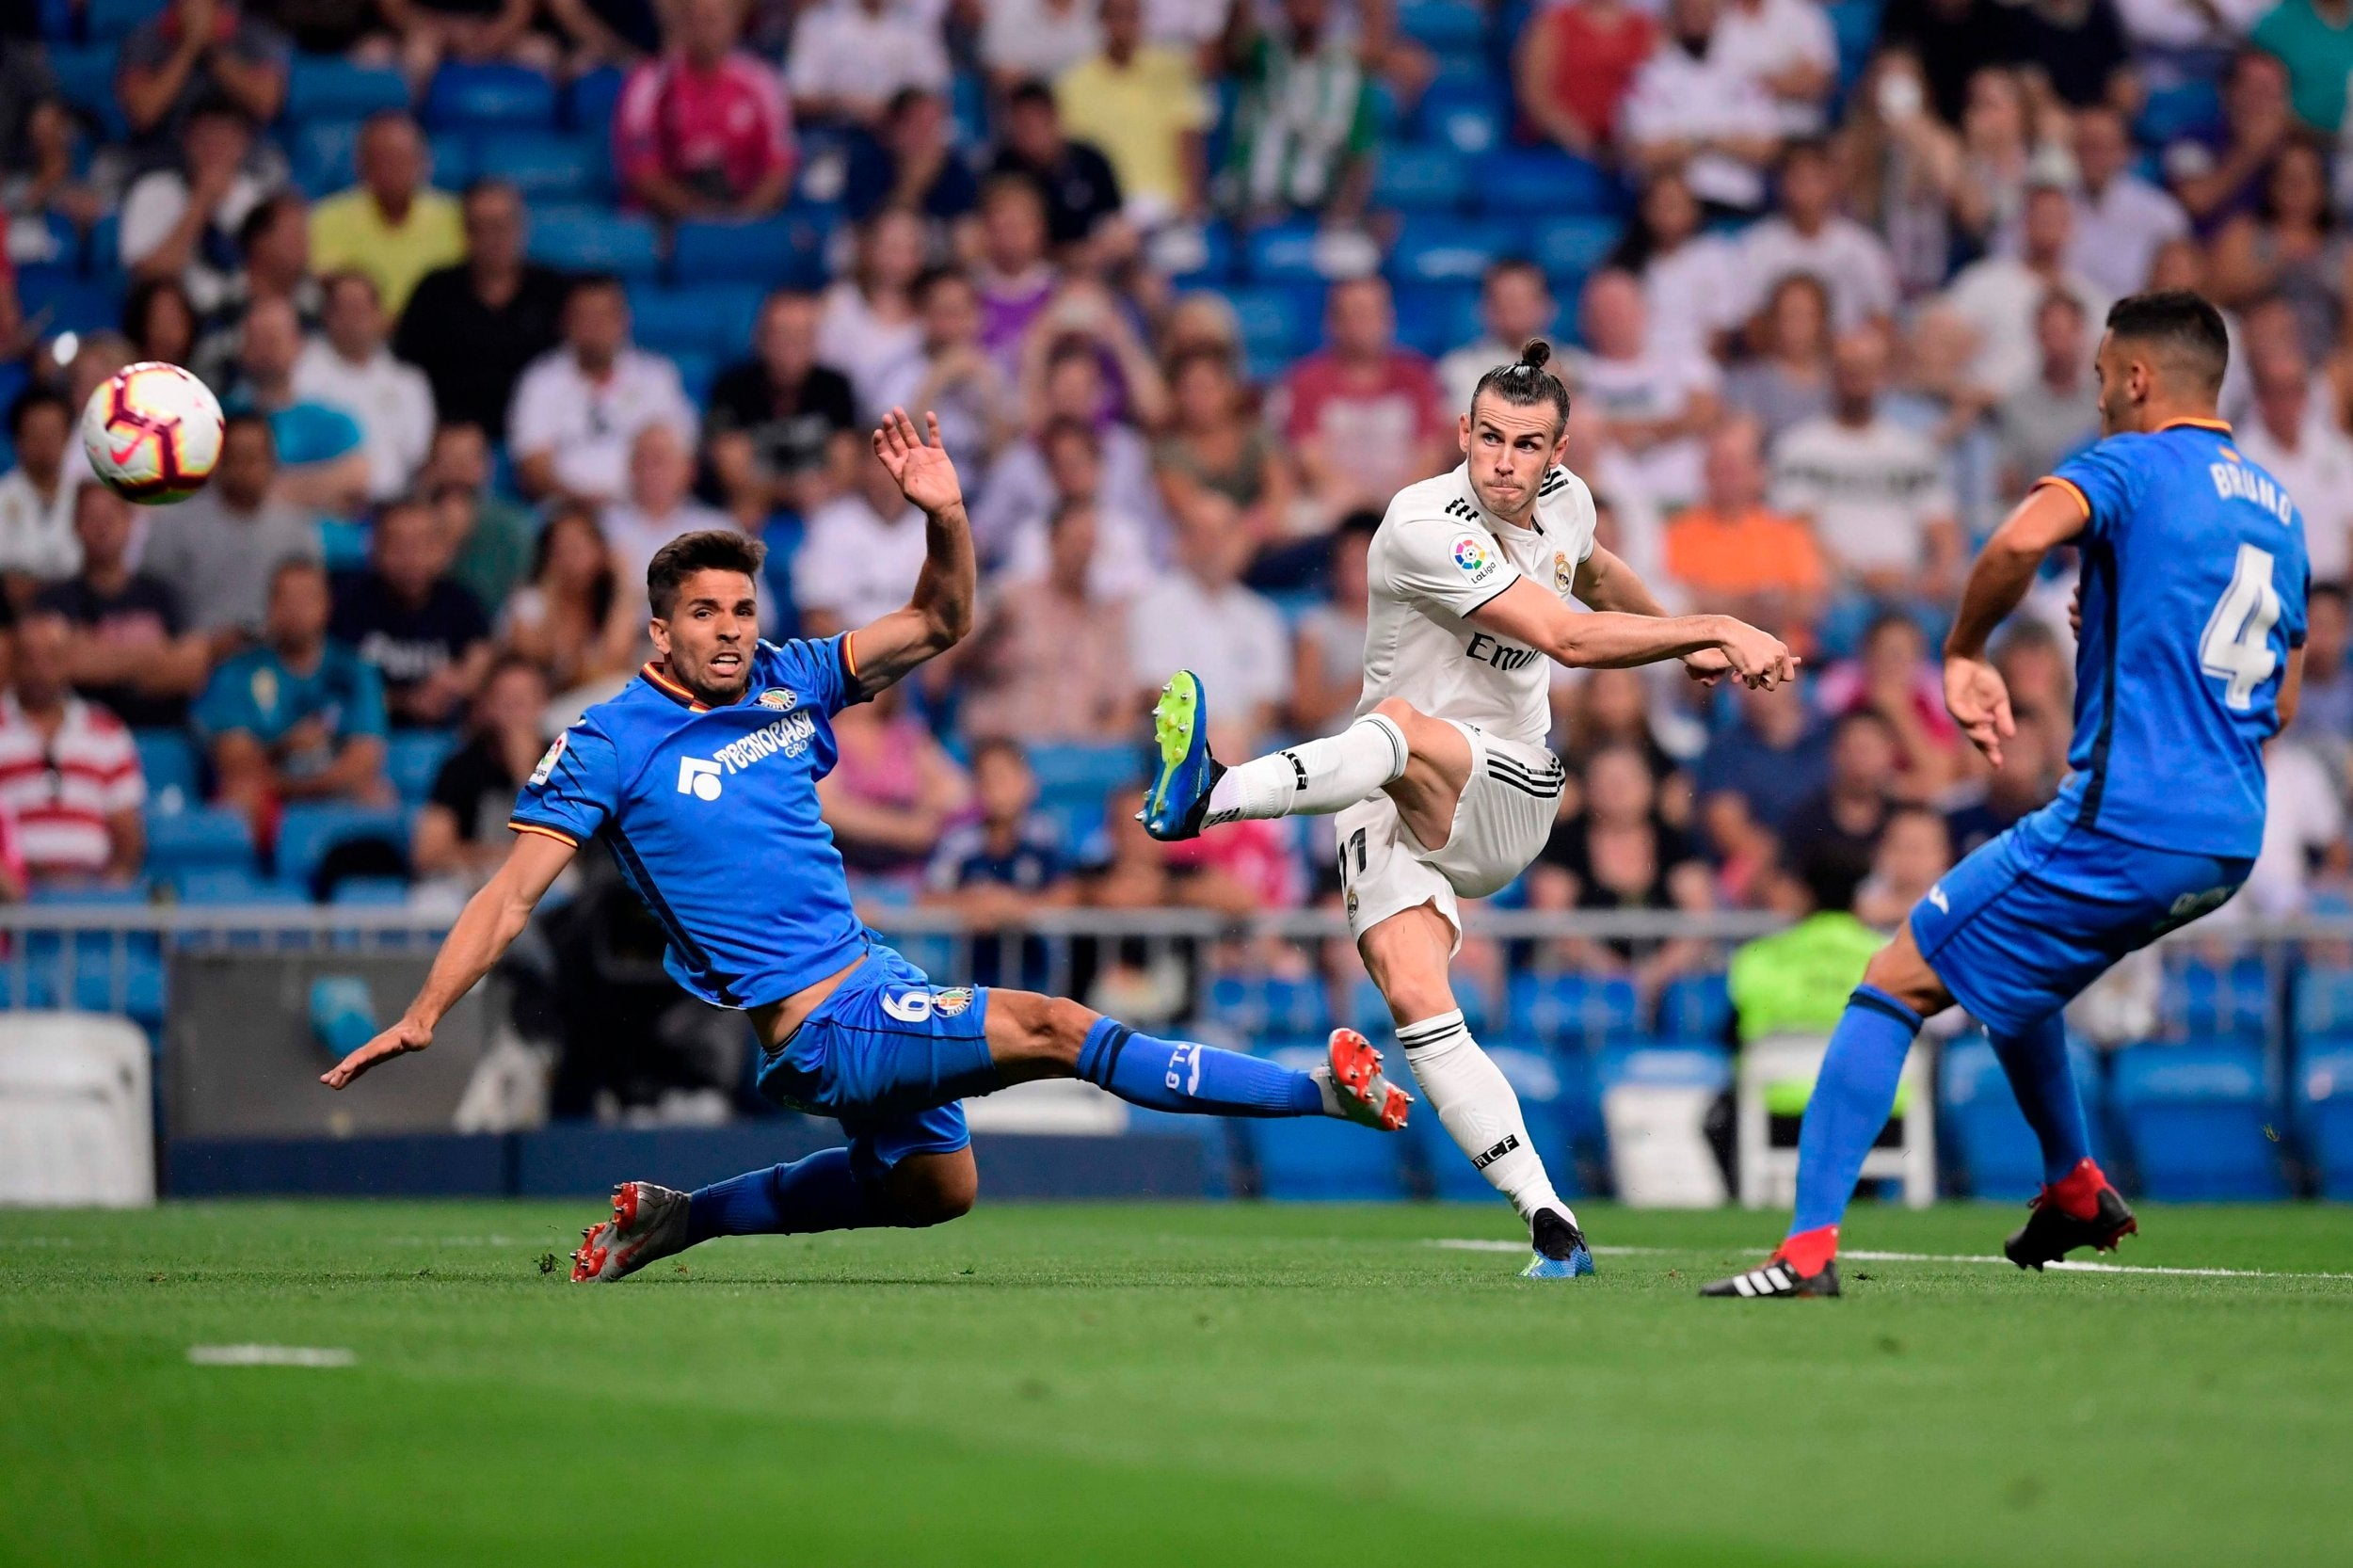 Real Madrid saw off Getafe in their first game of the season